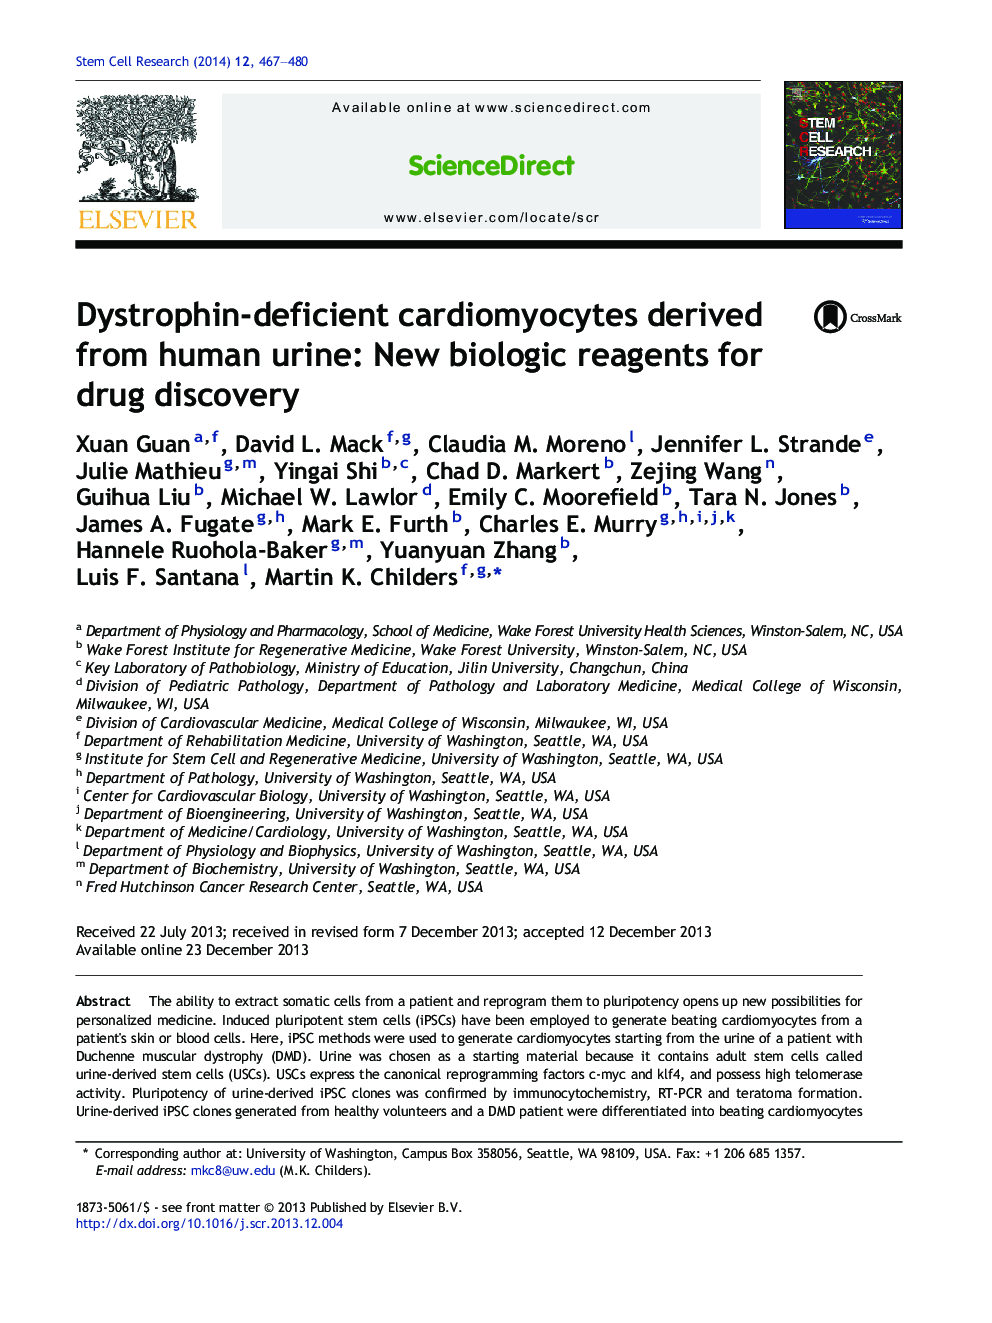 Dystrophin-deficient cardiomyocytes derived from human urine: New biologic reagents for drug discovery